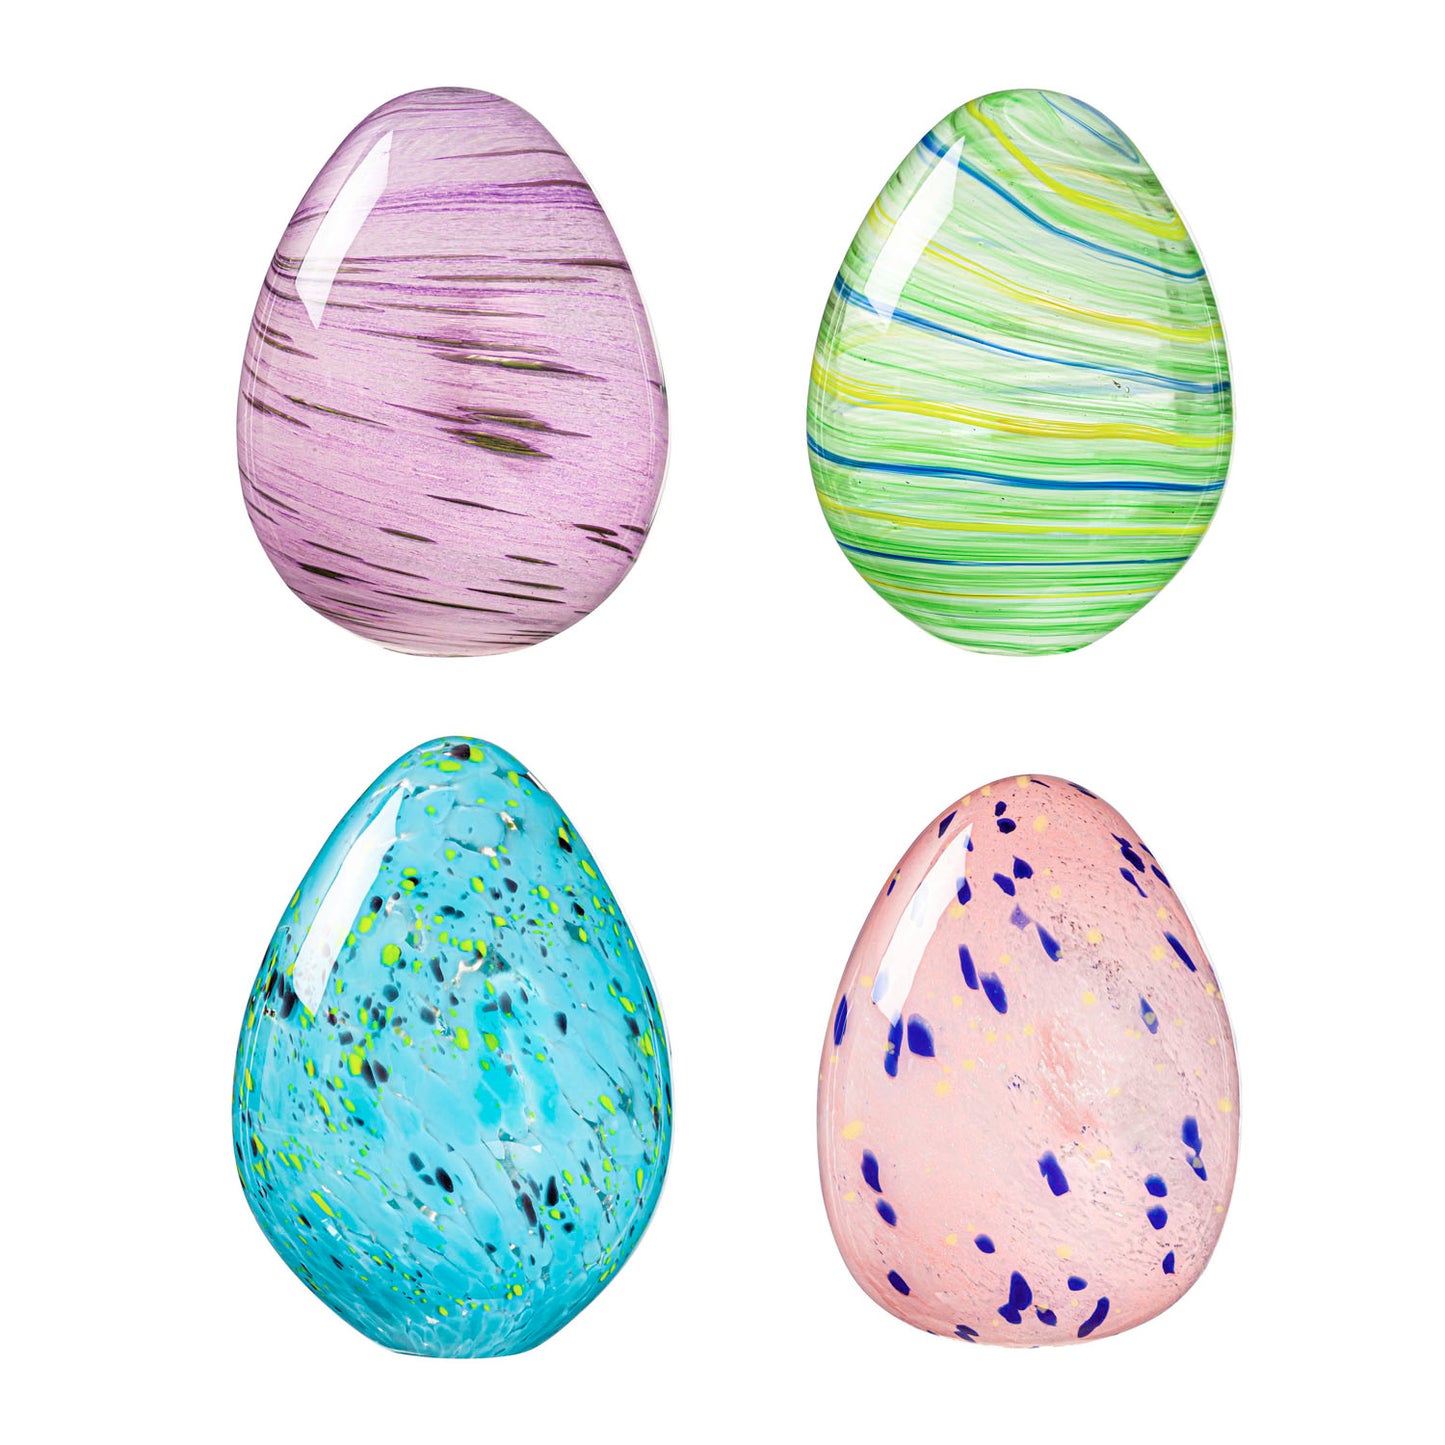 Colorful Glass Easter Egg